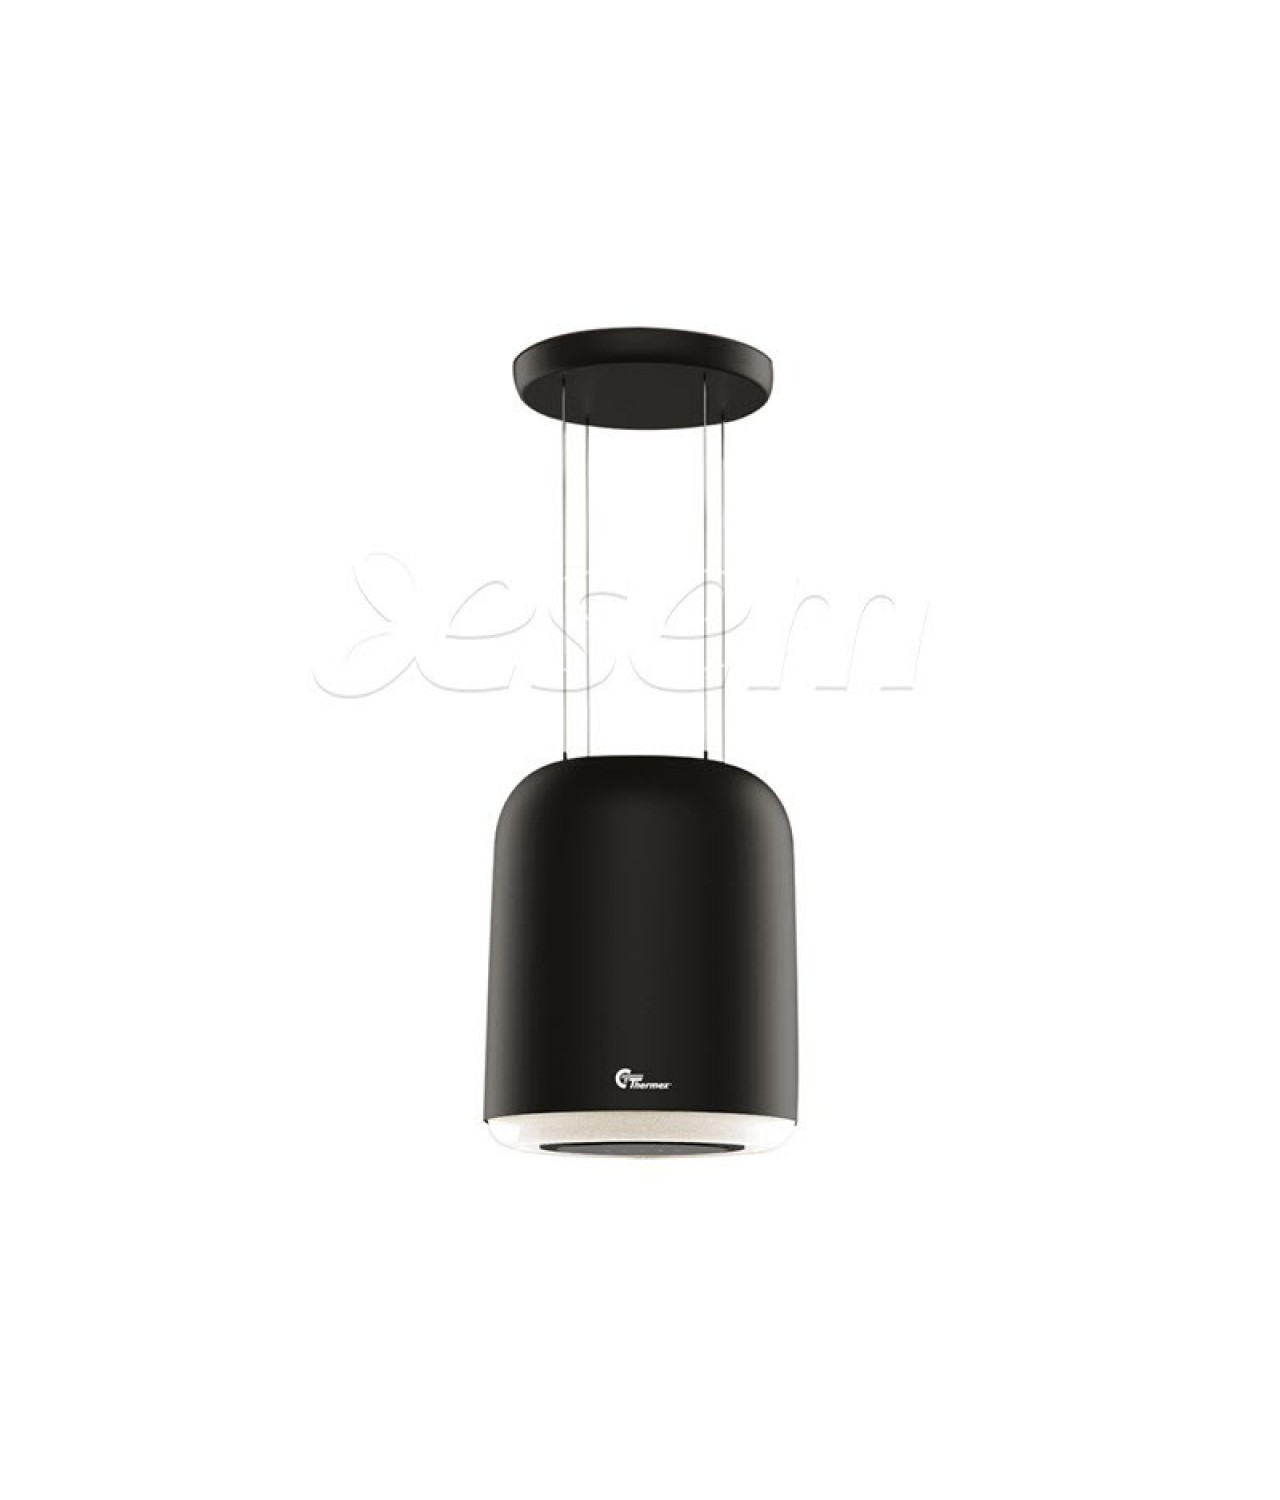 Island hoods-lamps with plasma filter Green air black